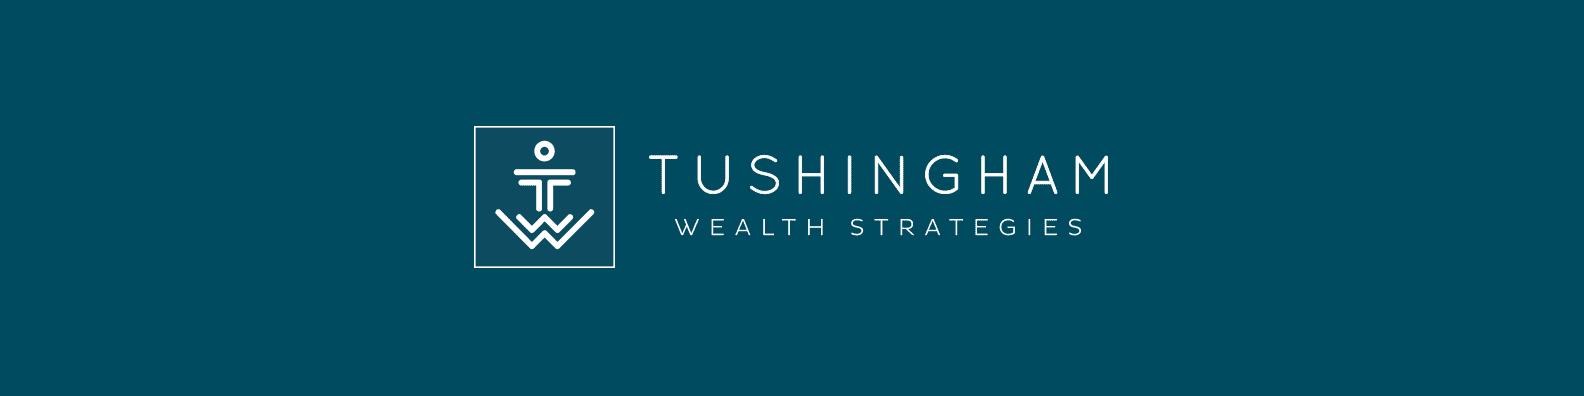 A professional logo for tushingham wealth strategies, featuring an icon with the letter 